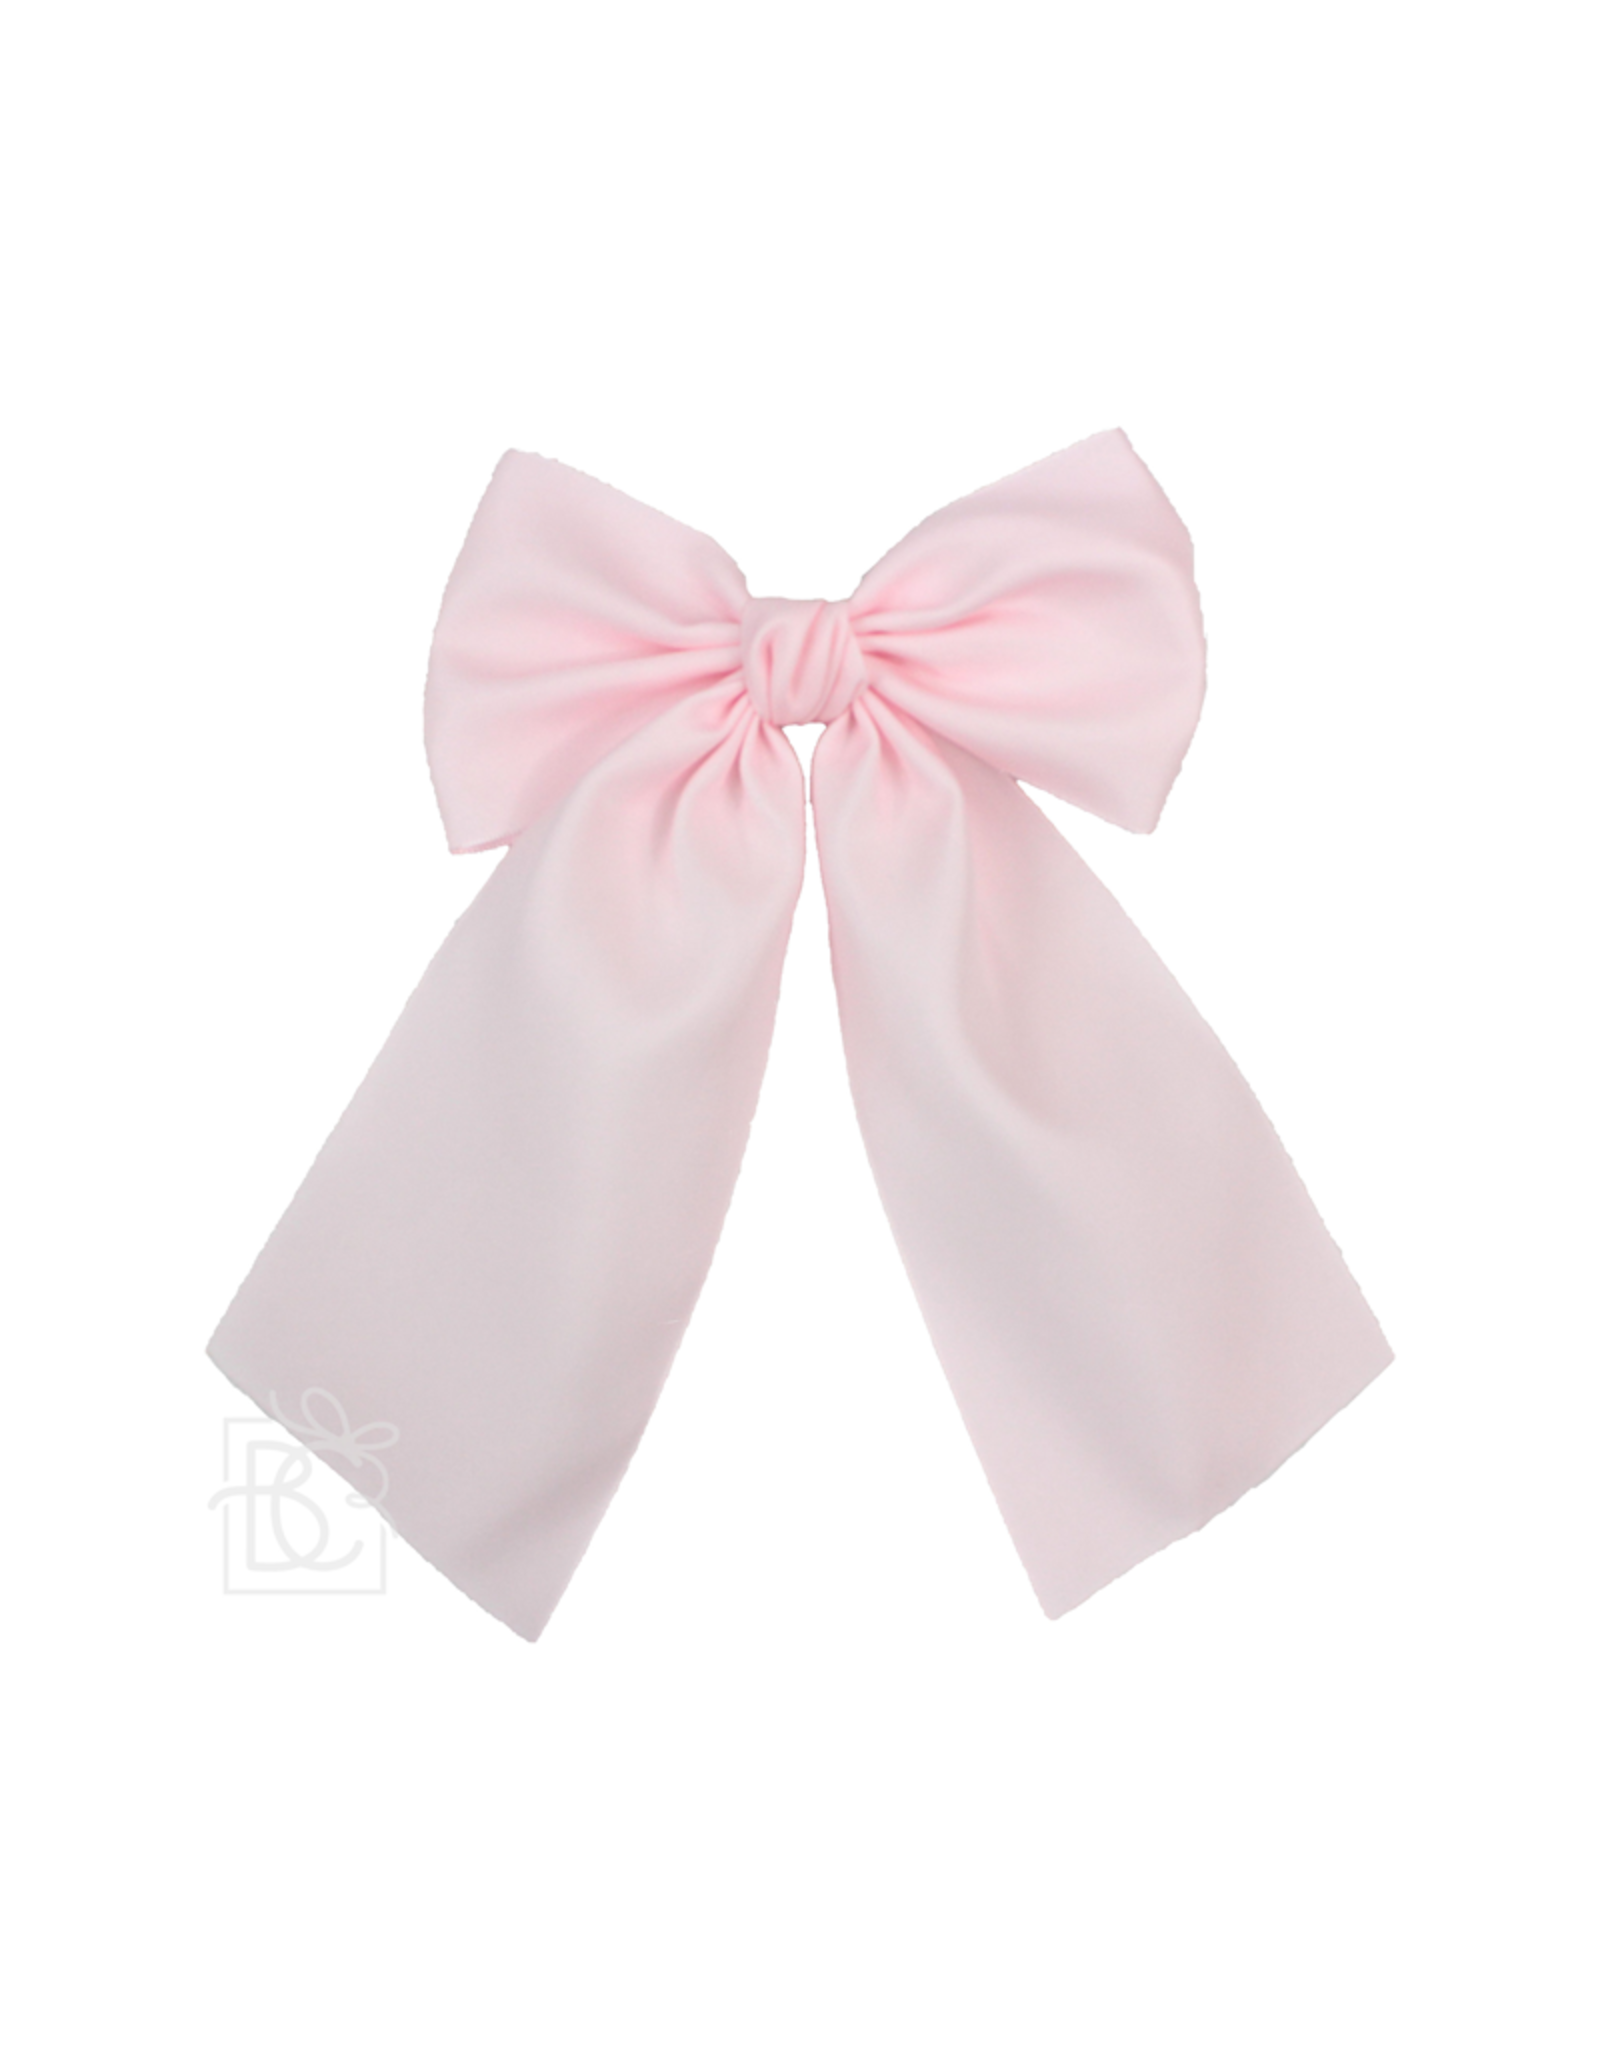 Beyond Creations EmilyE 5.5" Opaque Satin Bow with Tails